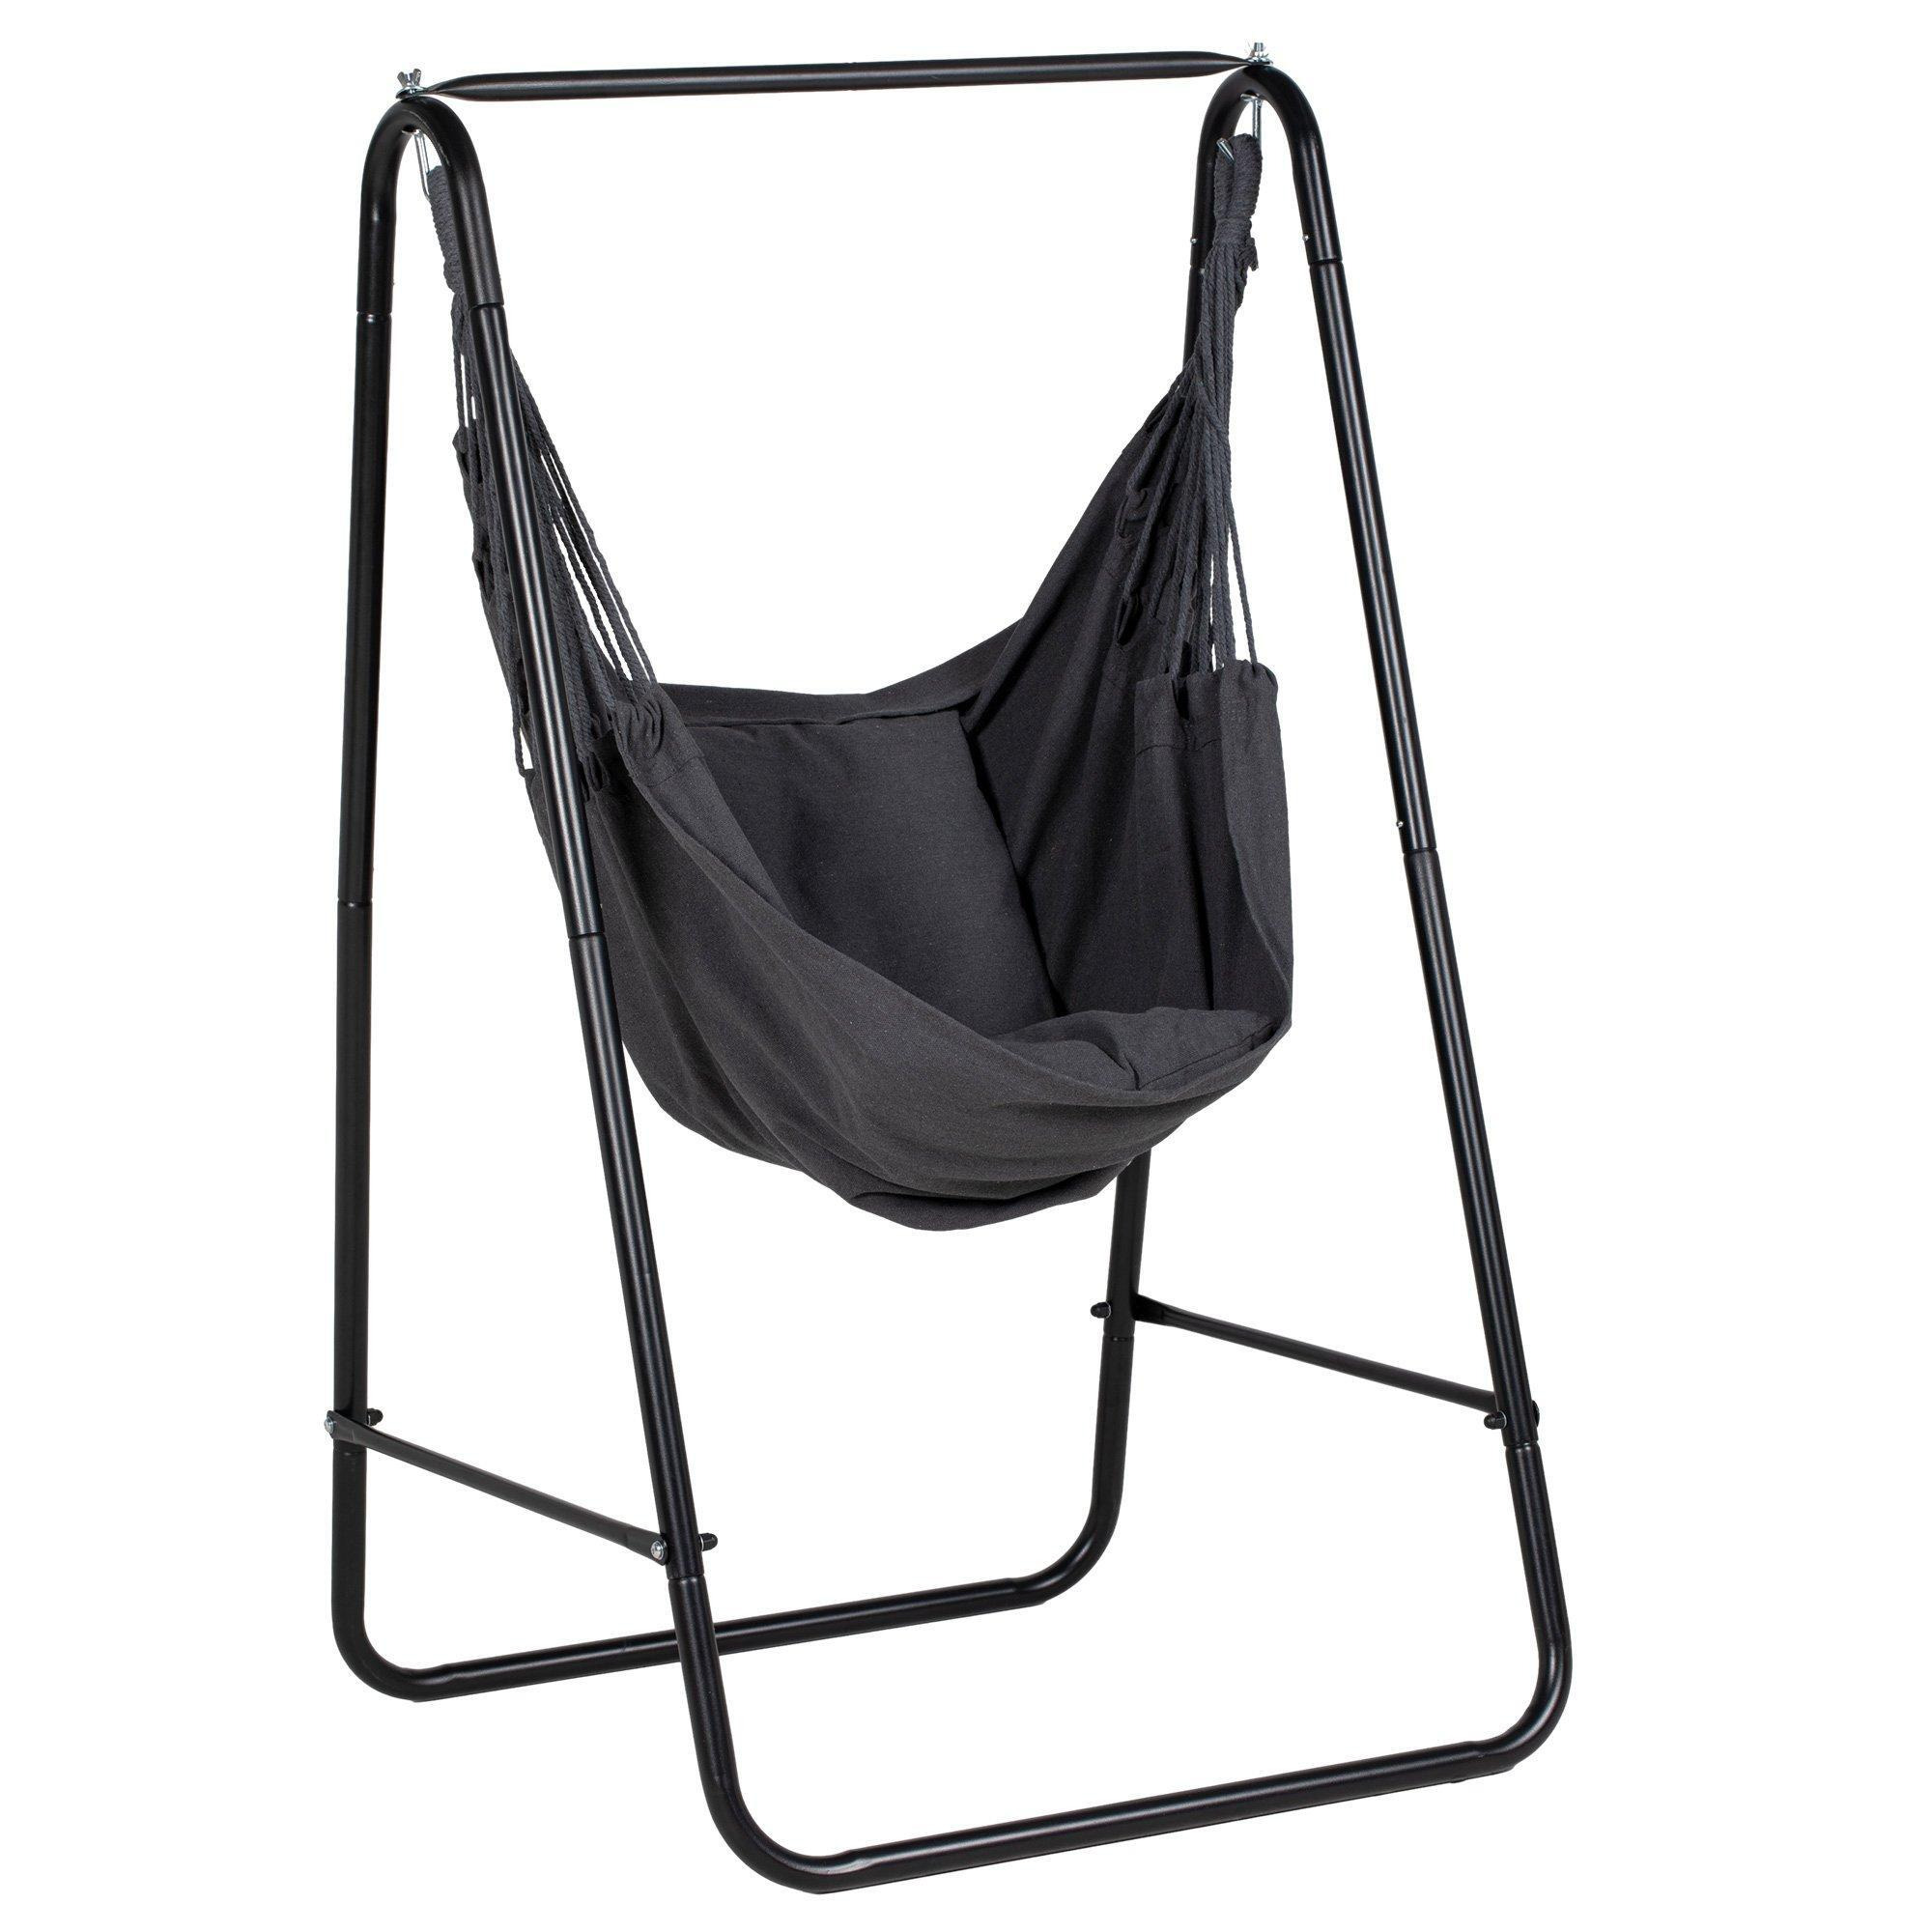 Patio Hammock Chair with Stand, Hanging Chair with Cushion, Armrest, Cream - image 1